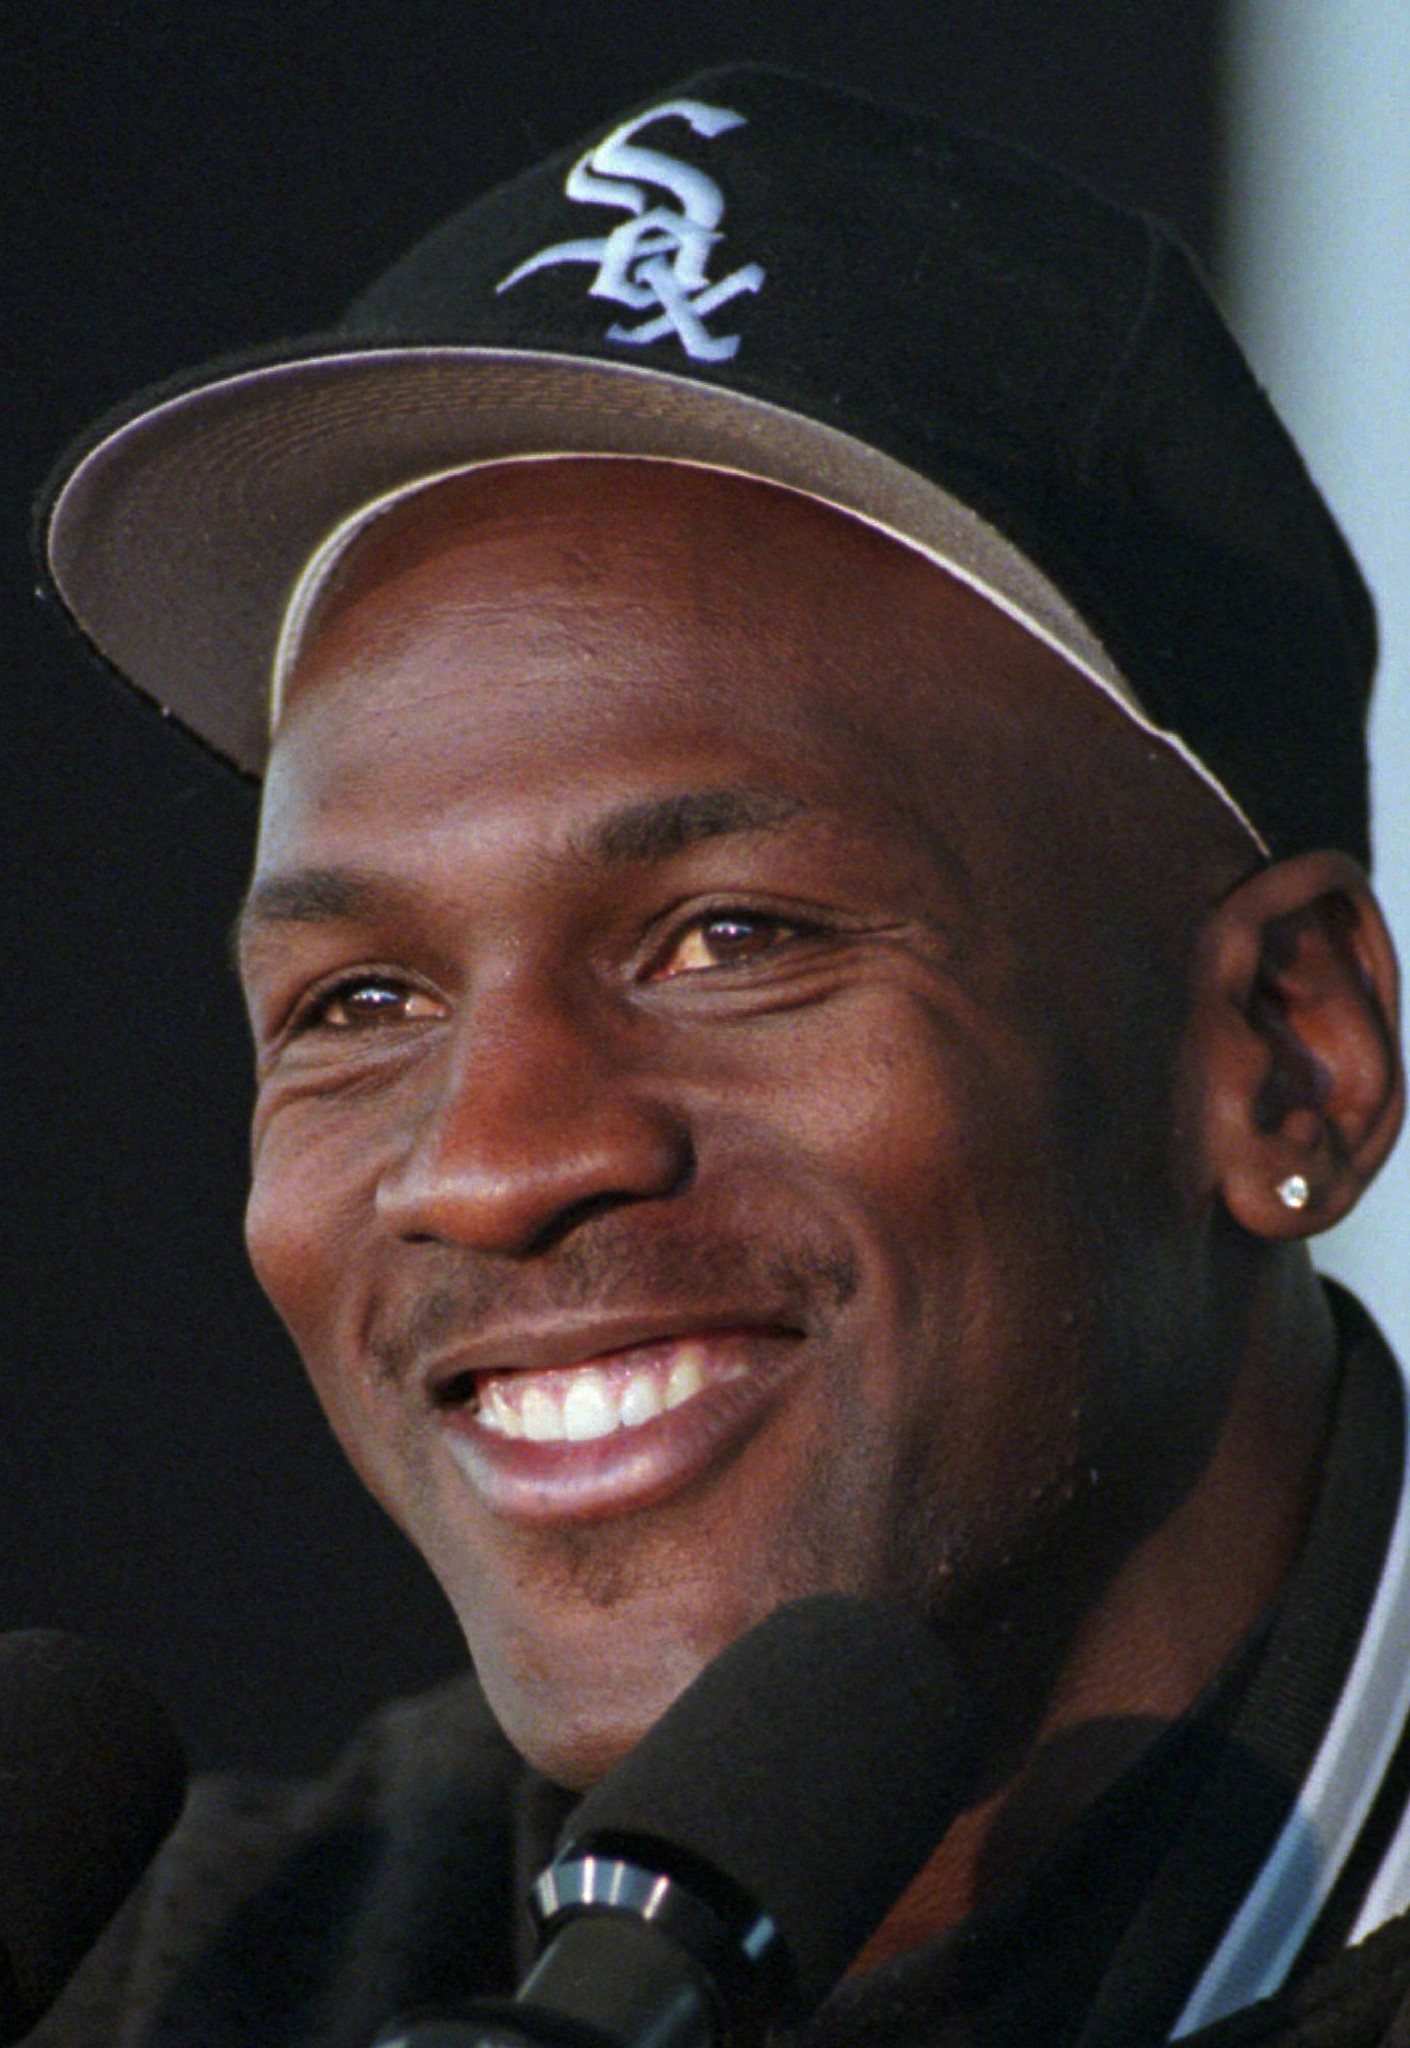 Michael Jordan talks with Chicago White Sox Manager Gene Lamont 19 News  Photo - Getty Images